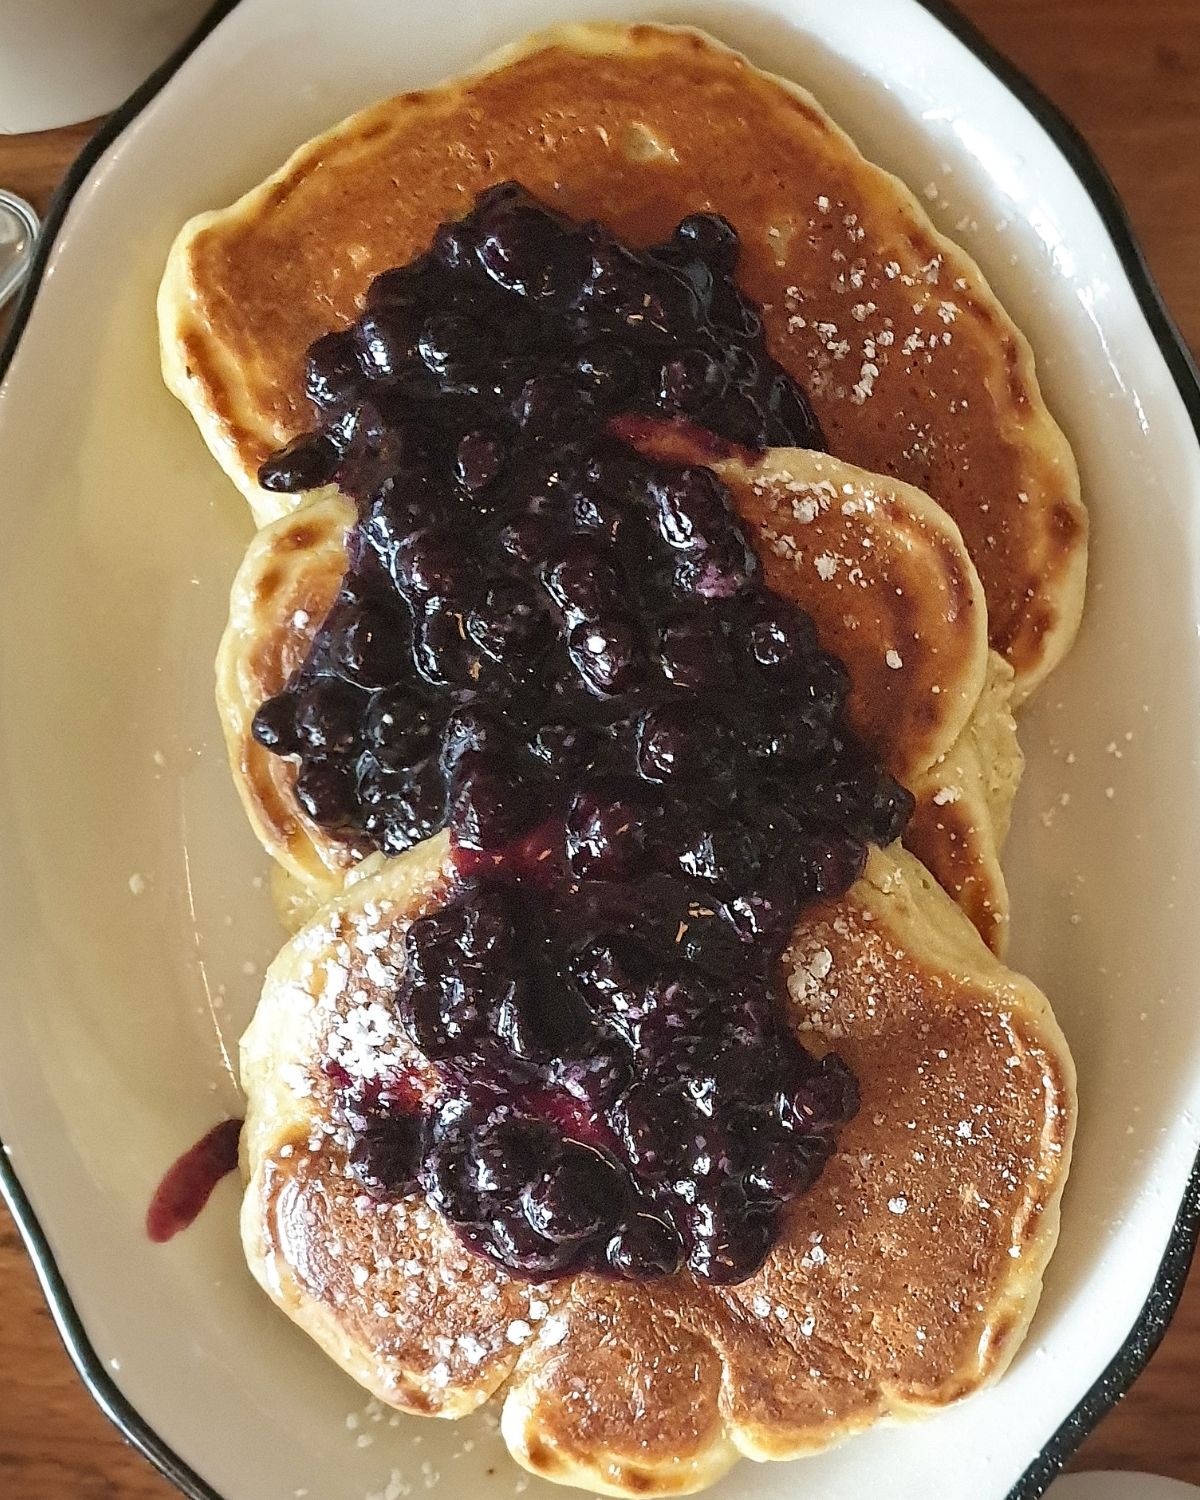 Top shot of lemon pancakes with a blueberry topping.